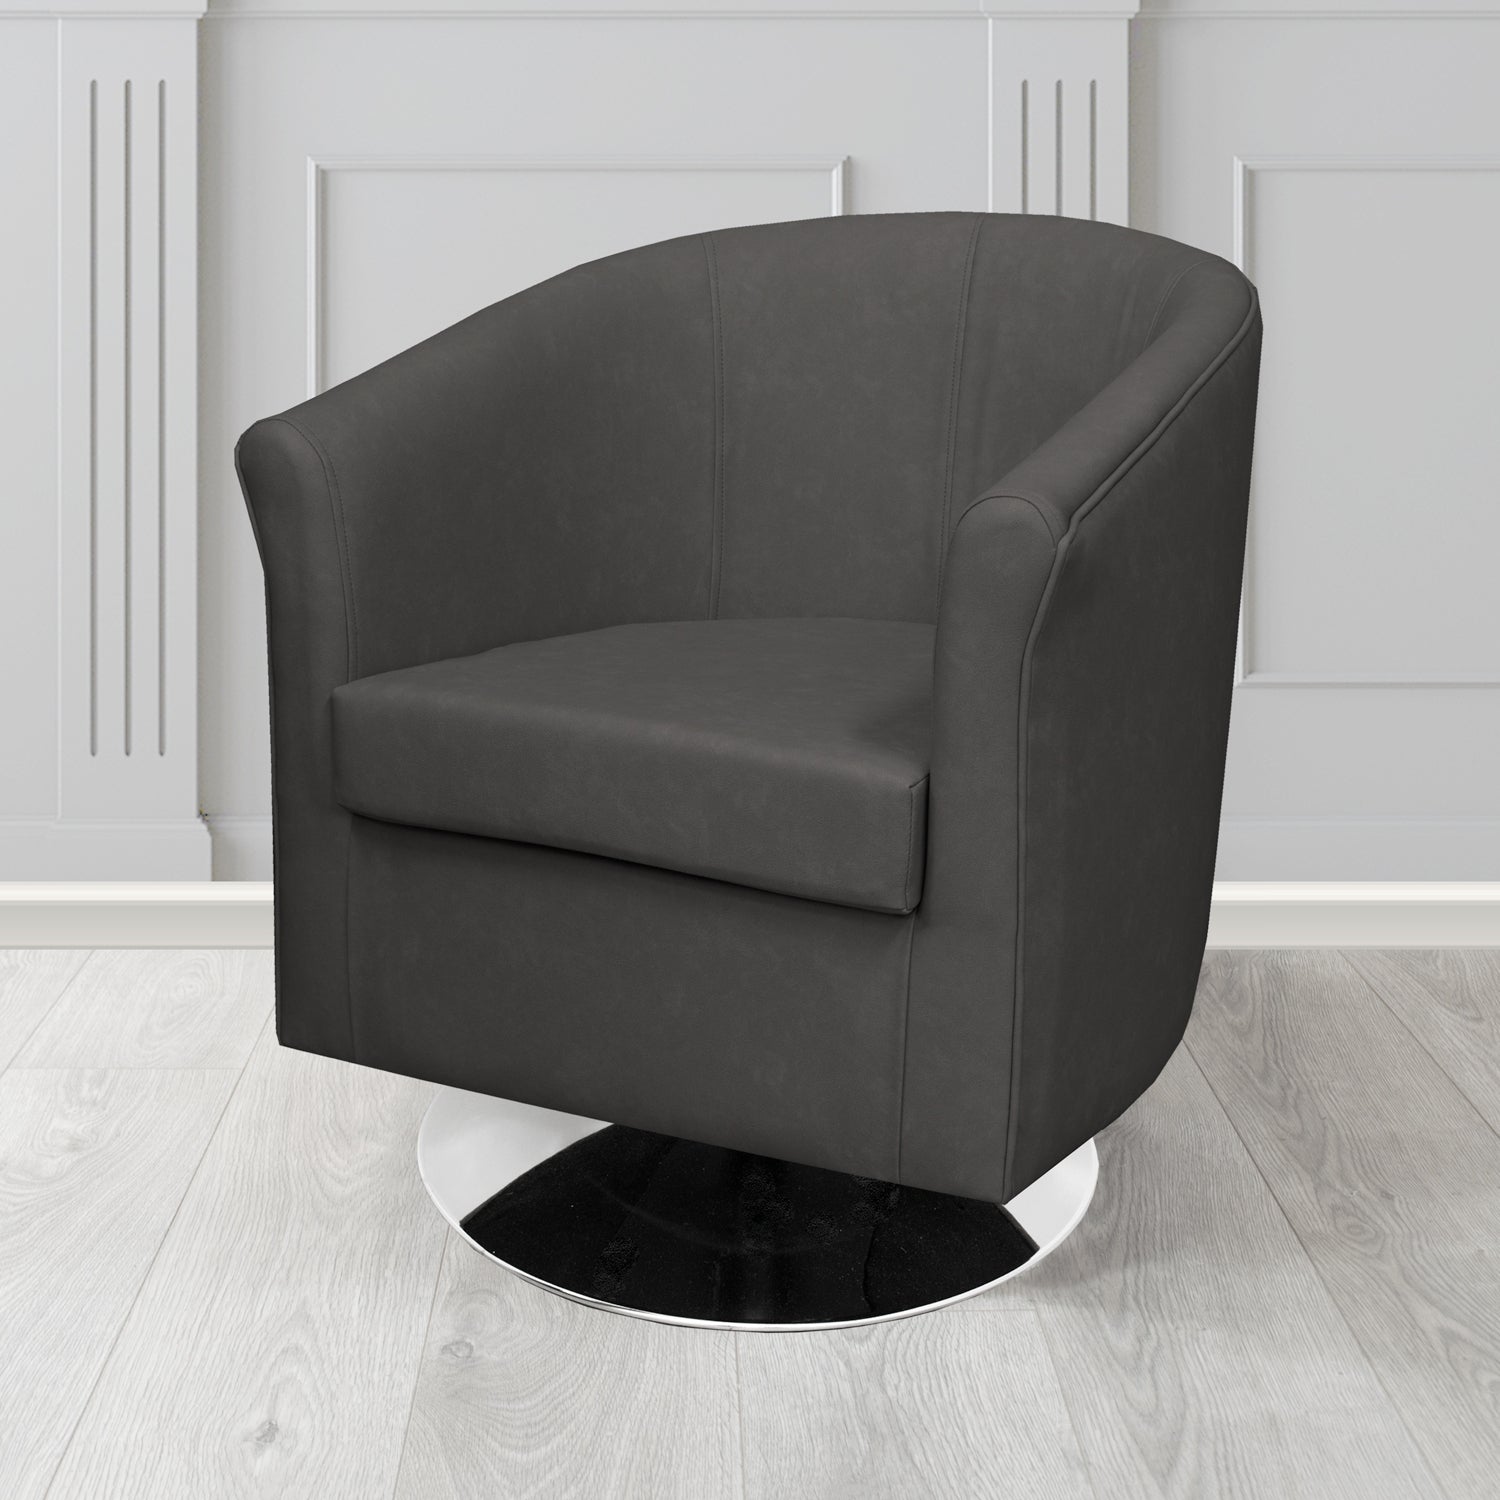 Tuscany Swivel Tub Chair in Infiniti Anthracite INF1862 Antimicrobial Crib 5 Faux Leather - The Tub Chair Shop